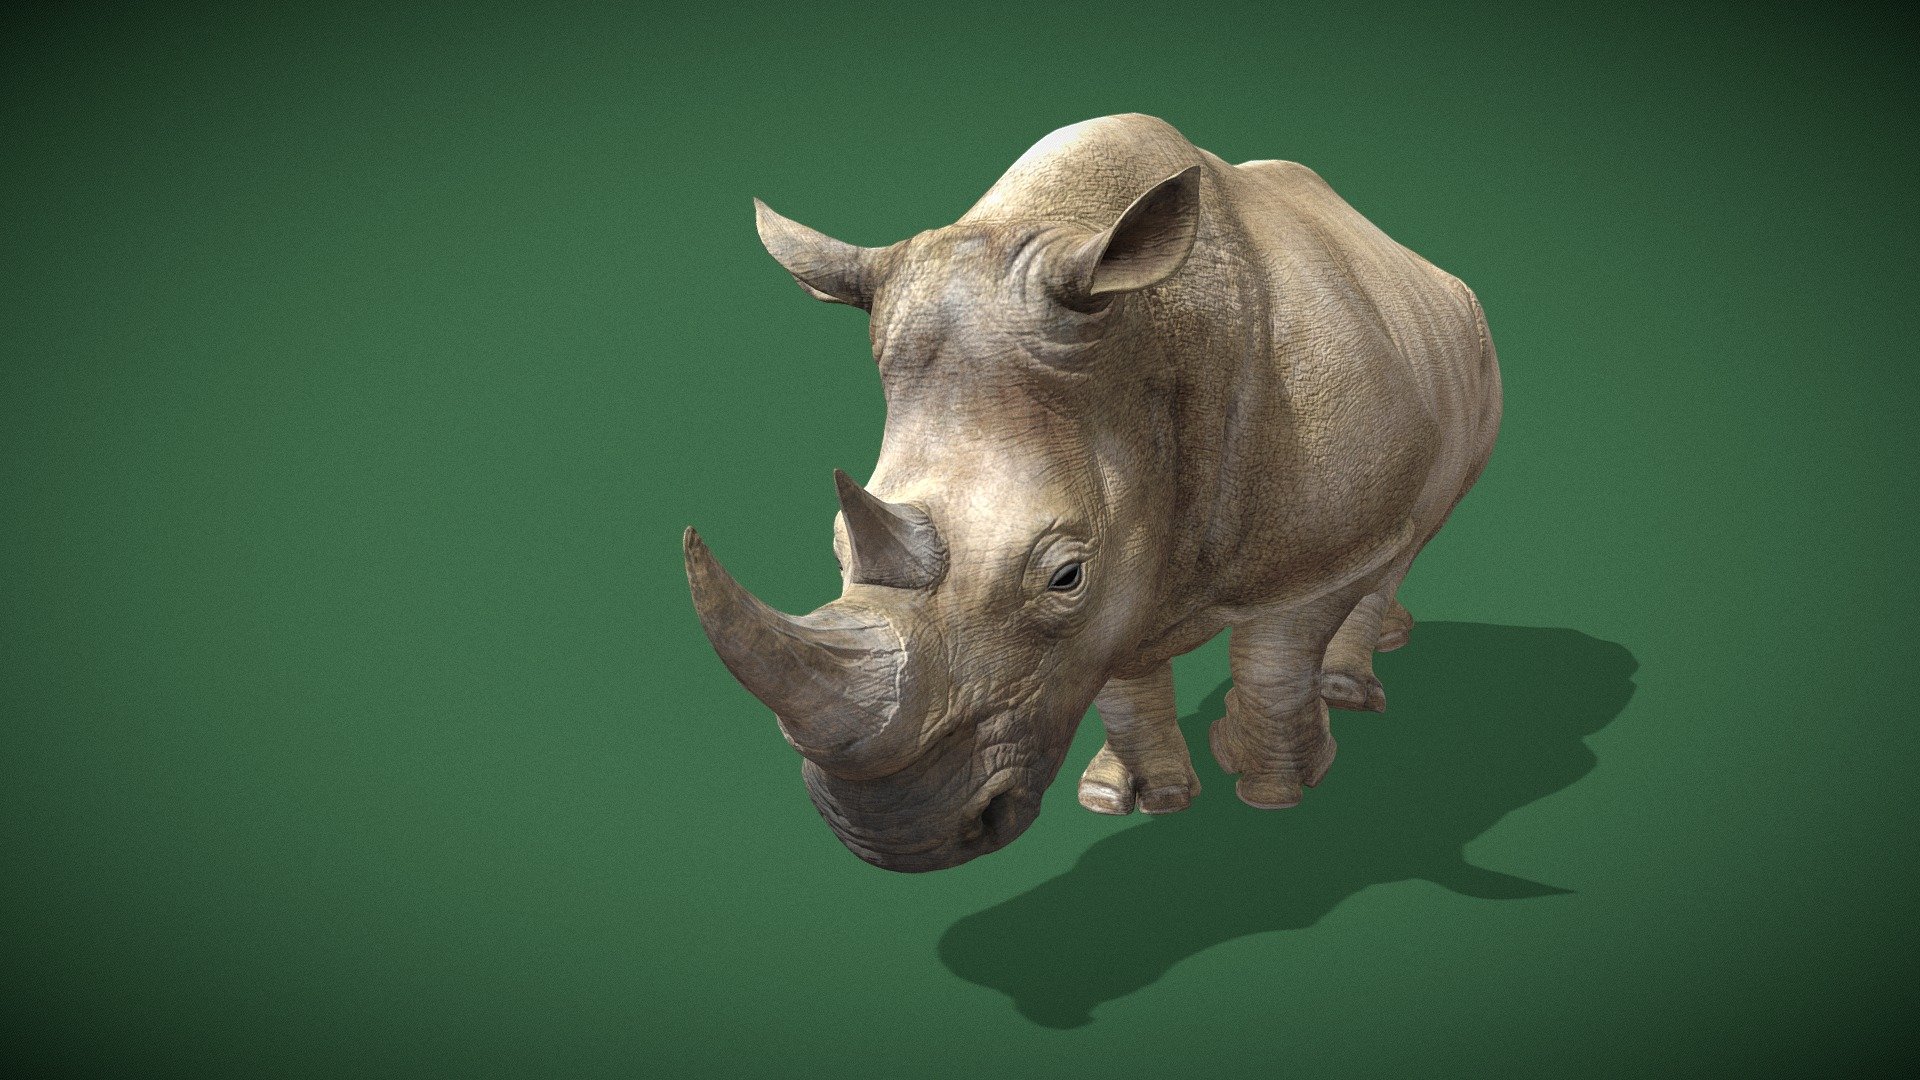 An looping Animation of a Rhinoceros Walking.

See this 3D model in action, and more models like it, in this collection of free augmented reality apps:

https://morpheusar.com/ - Animated Rhinoceros Walking Animal Loop - Download Free 3D model by LasquetiSpice 3d model